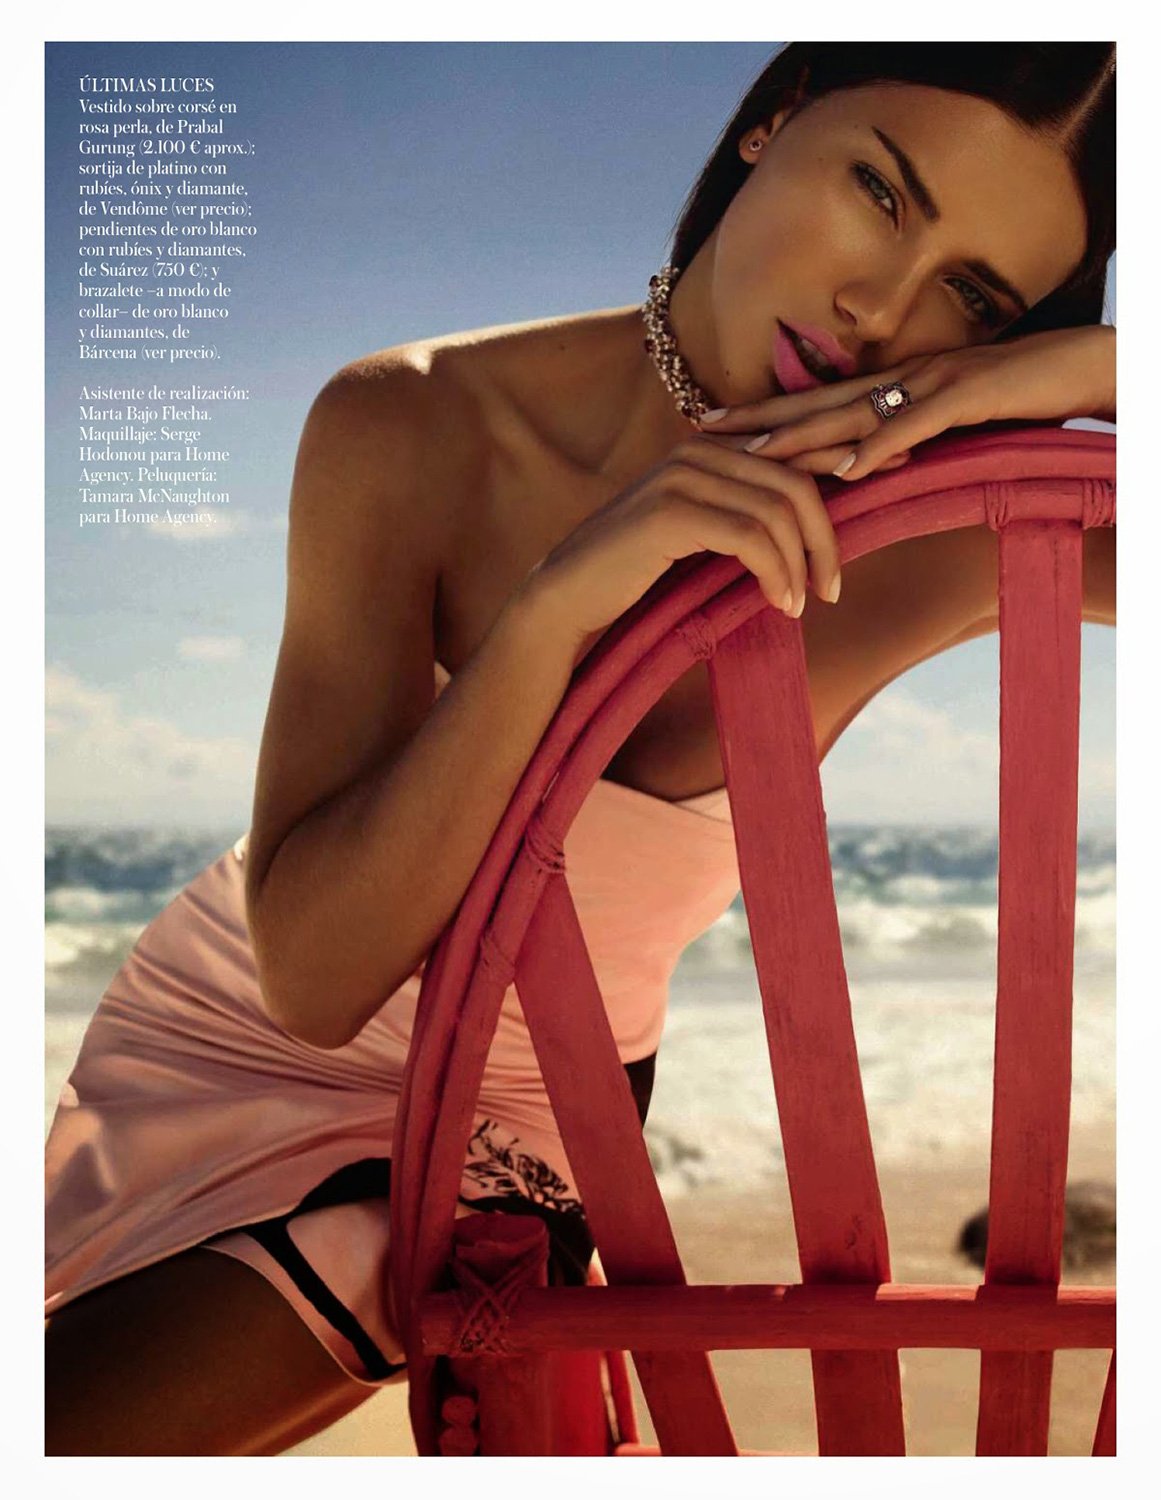 Adriana-Lima-by-Miguel-Reveriego-Vogue-Spain-May-2014 (1).jpg